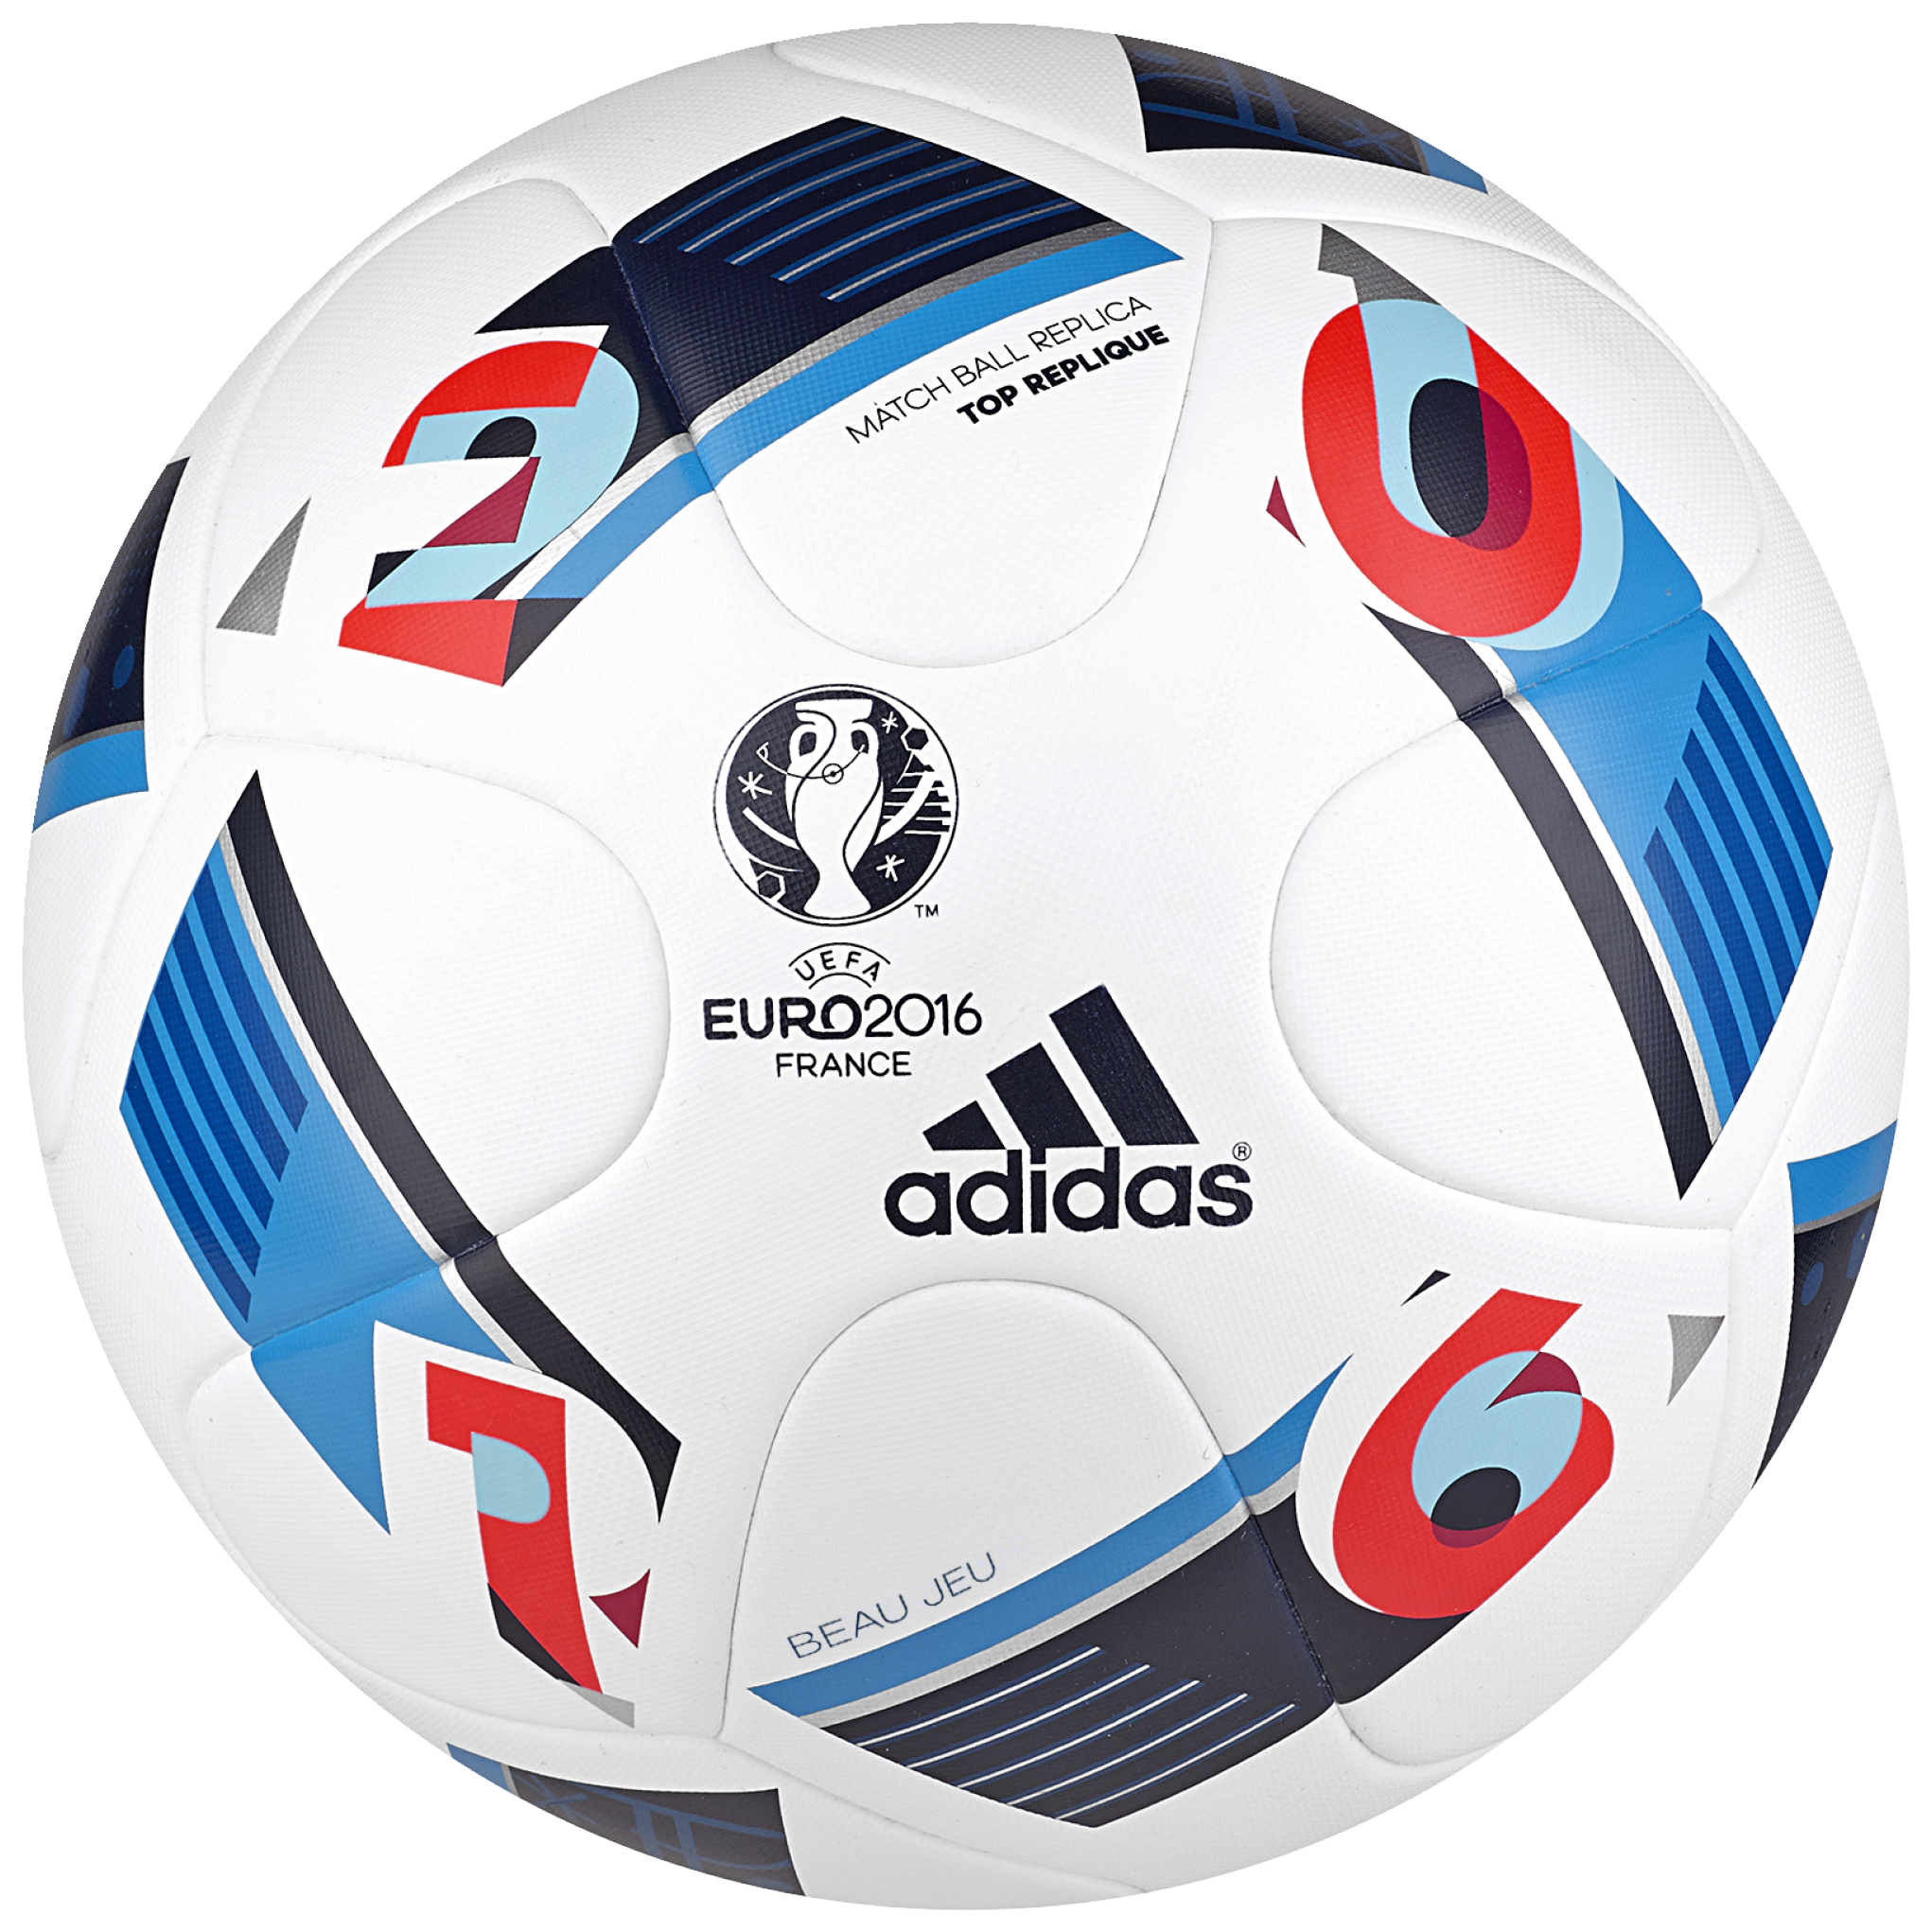 Euro Cup 2016 France Ball PNG Transparent Clip Art Image.